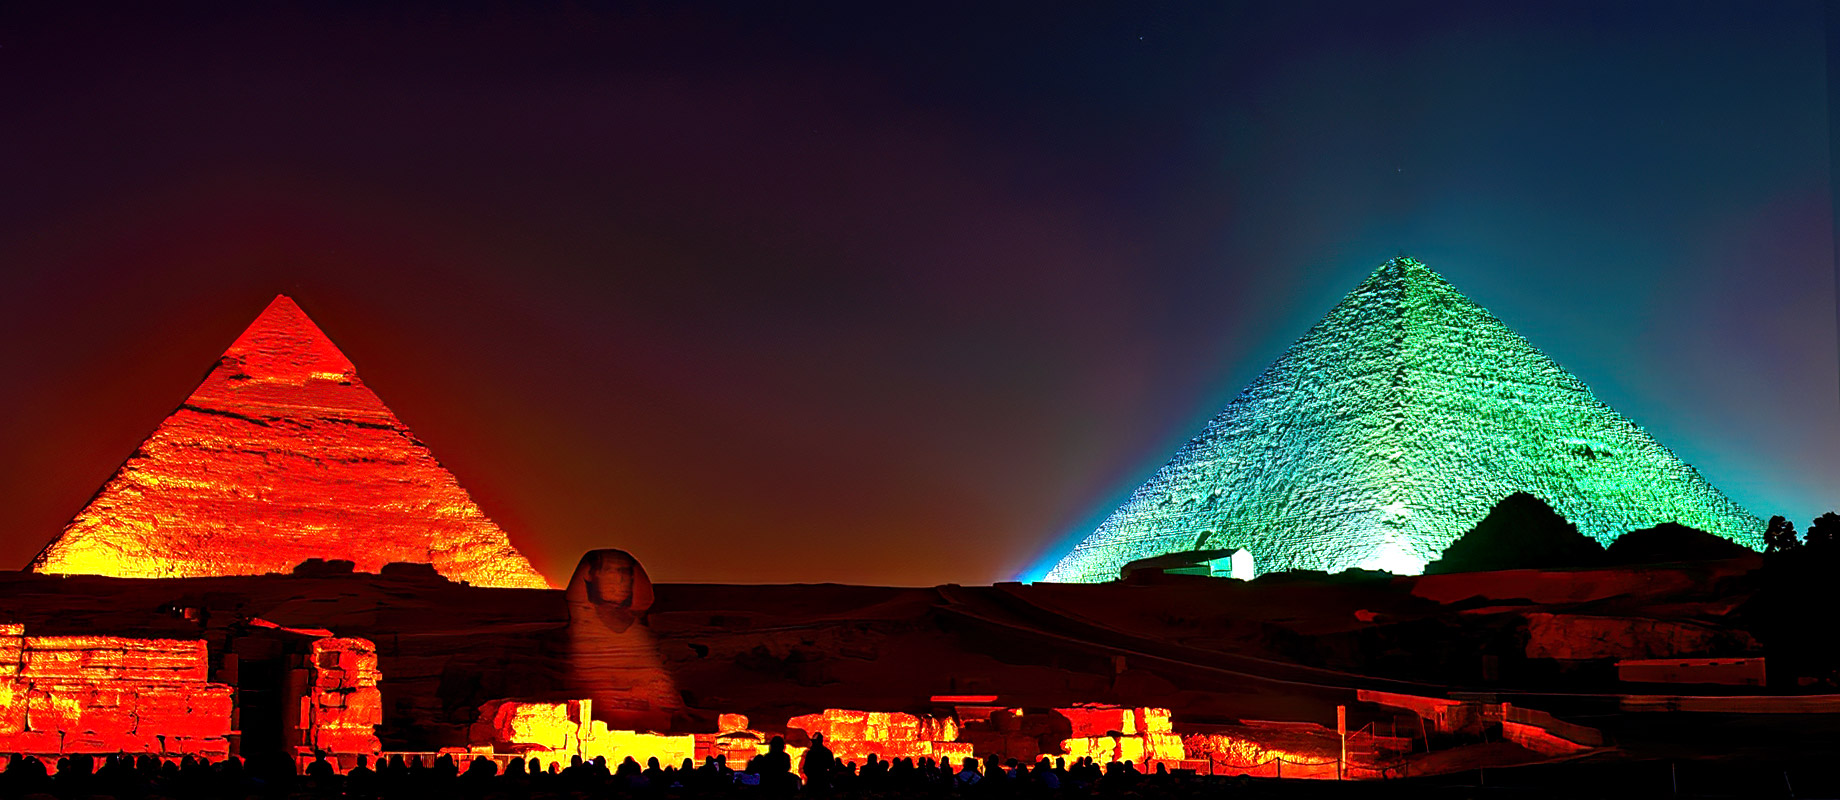 The Pyramids of Giza - Sphinx - Sound and Light Show - Egypt